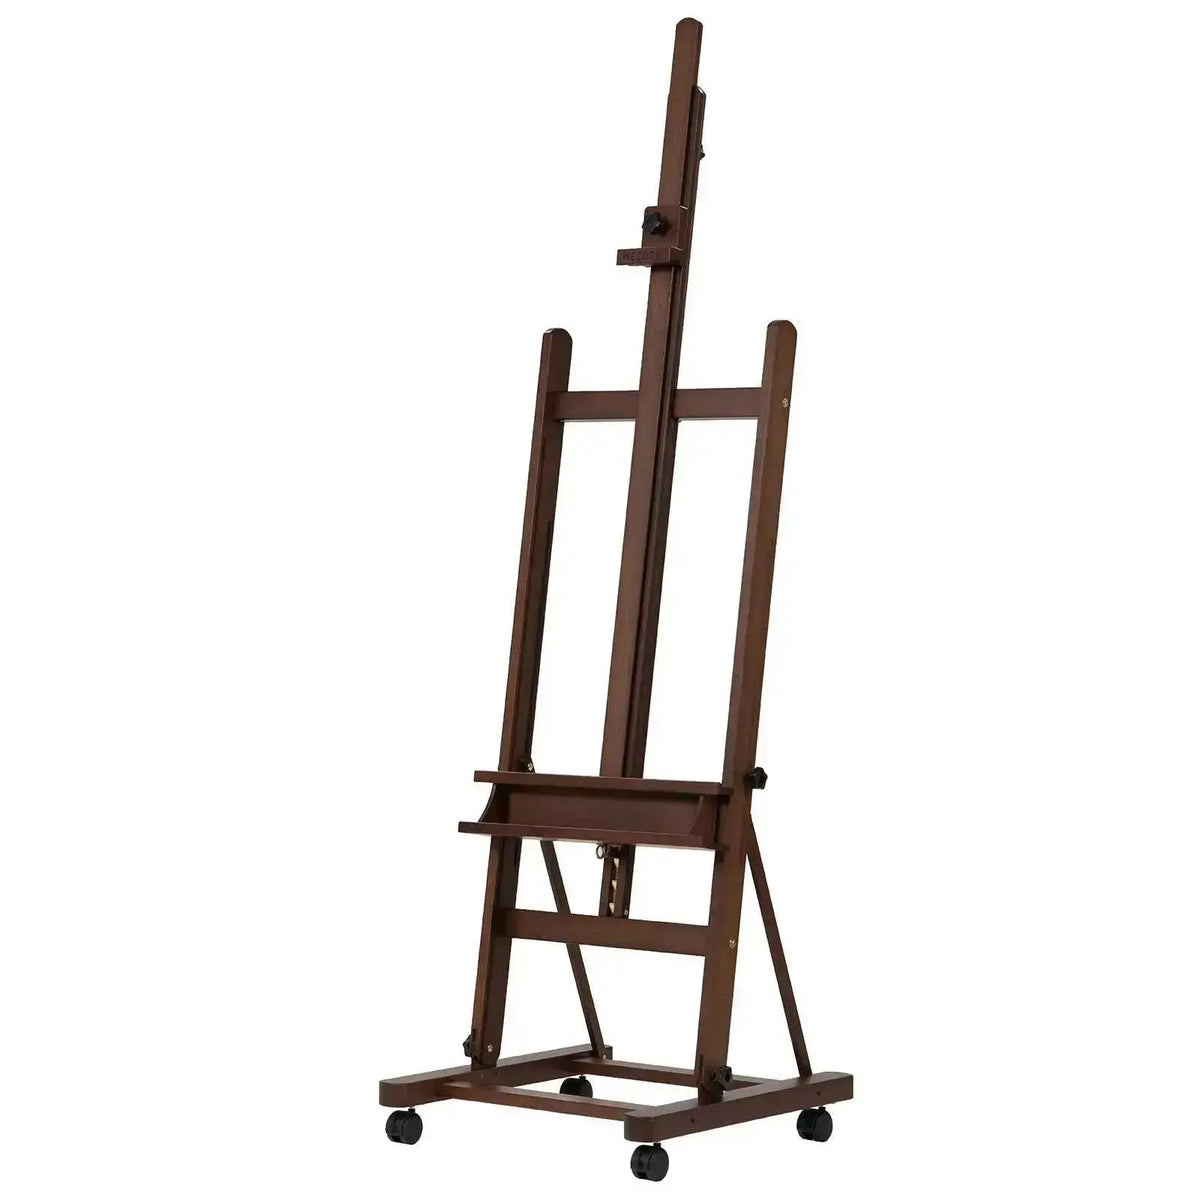 MEEDEN Multi-Function Studio Easel,H-Frame Easel,Painting Easel for  Adults,Artist Easel,Floor Easel,Solid Beech Wood Easel w/Front Wheels,Holds  Canvas Art up to 77(Walnut Color)